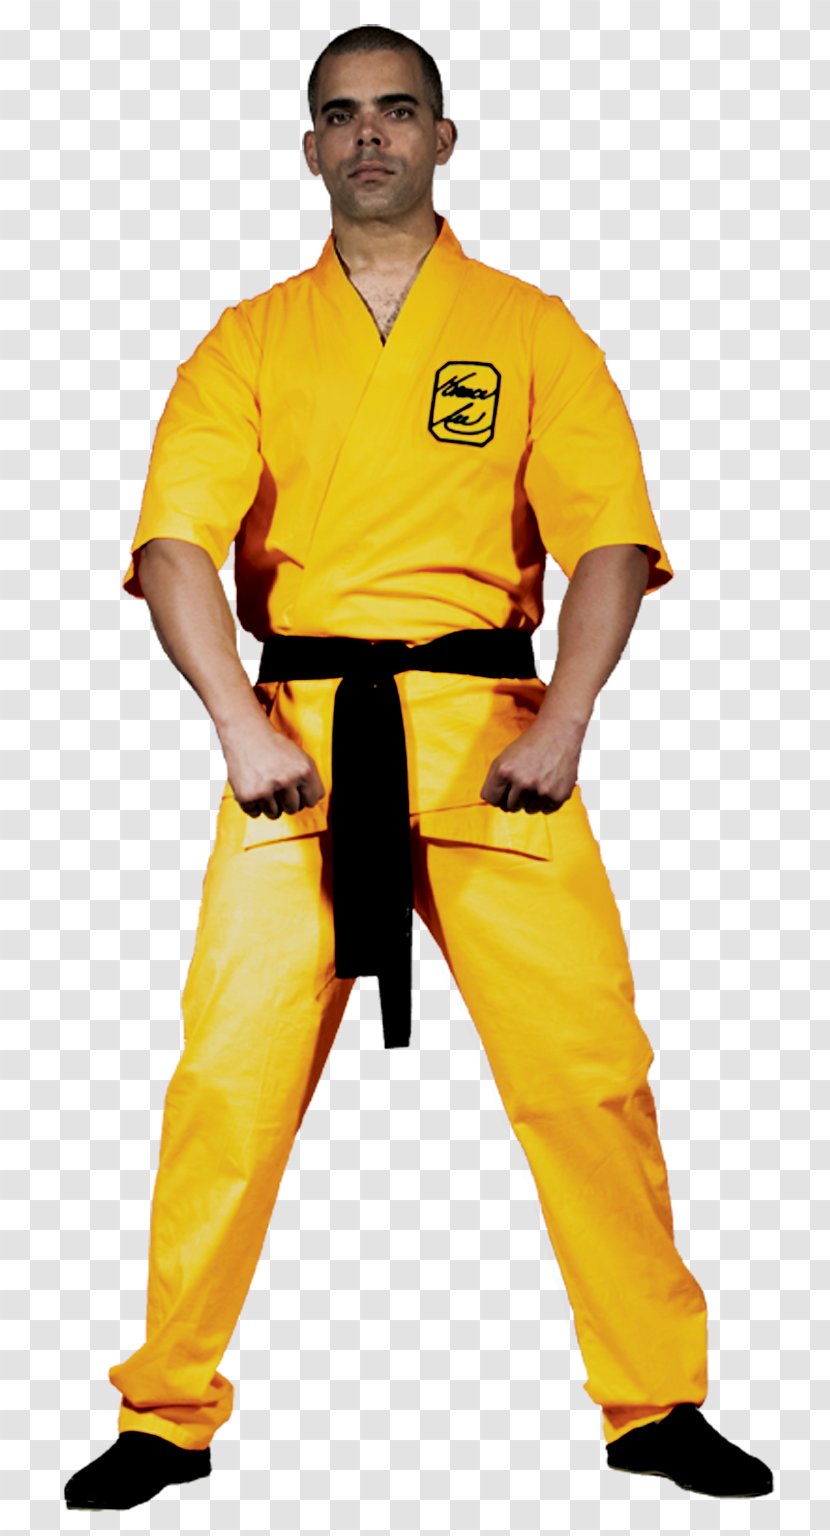 Bruce Lee Karate Gi Uniform Clothing Costume - Chinese Martial Arts Transparent PNG